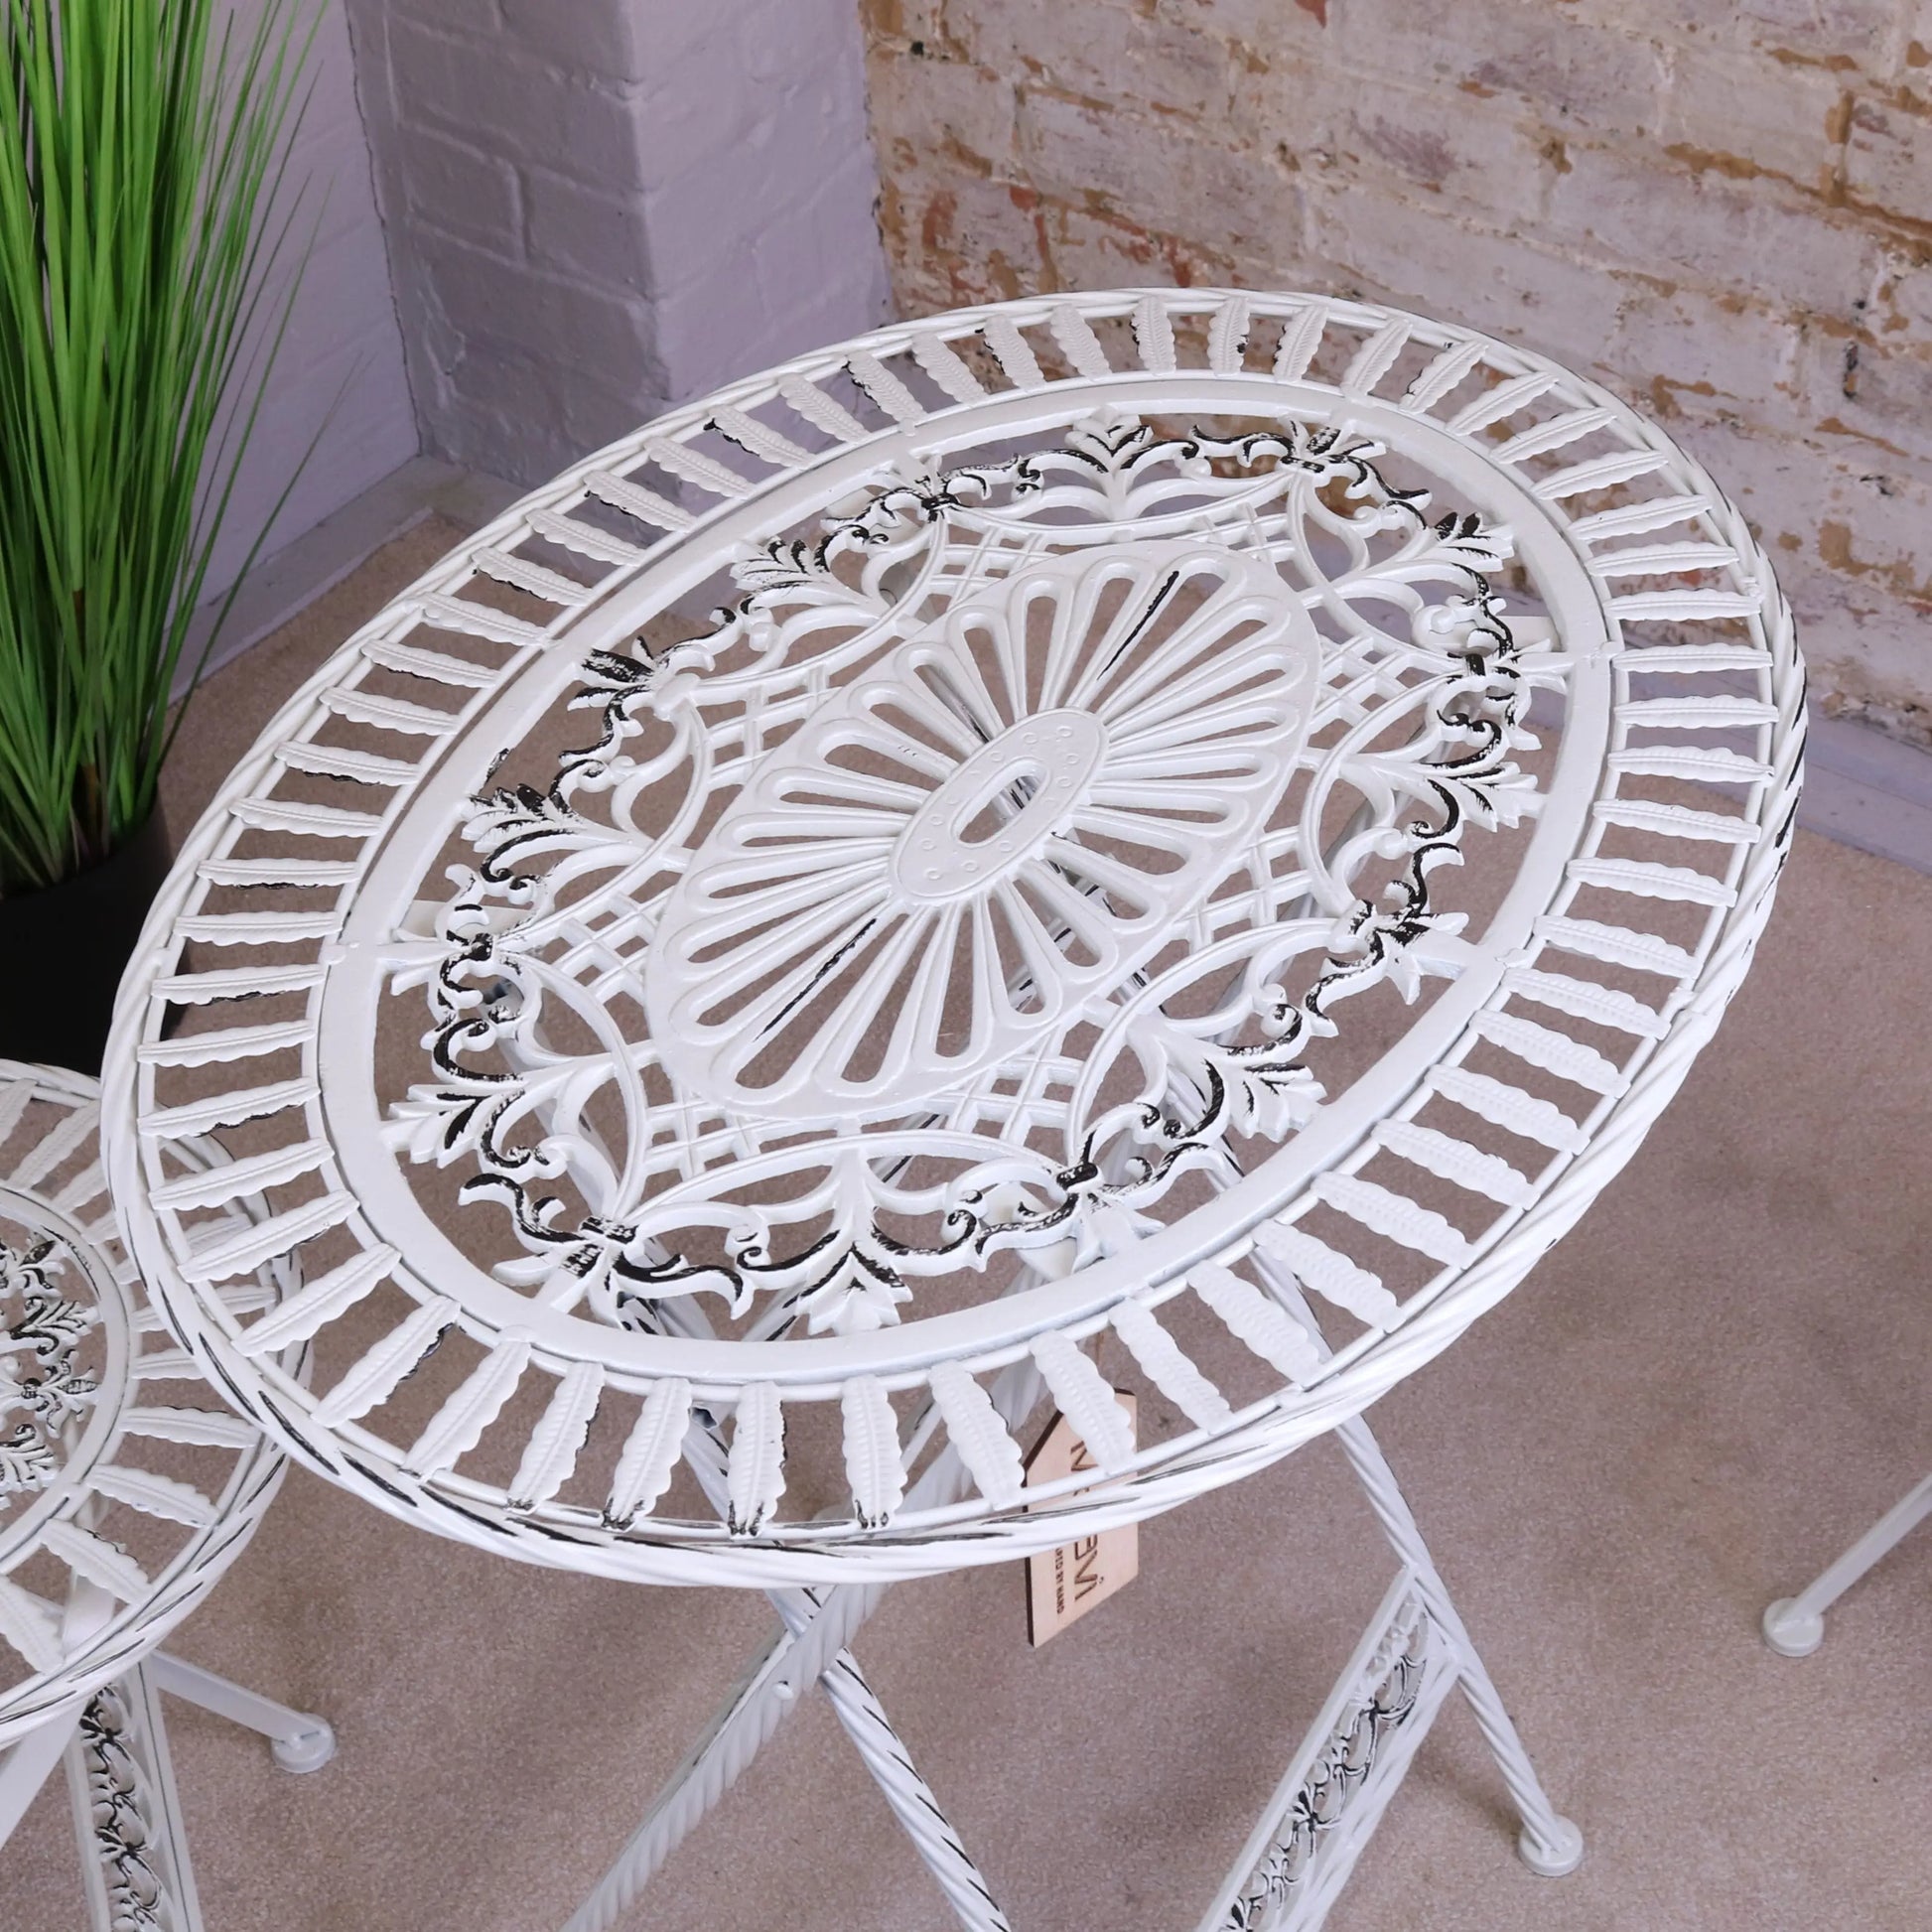 Odal 3 Piece Garden Table and Chairs Oval Shape Zoomed in View of Table Top